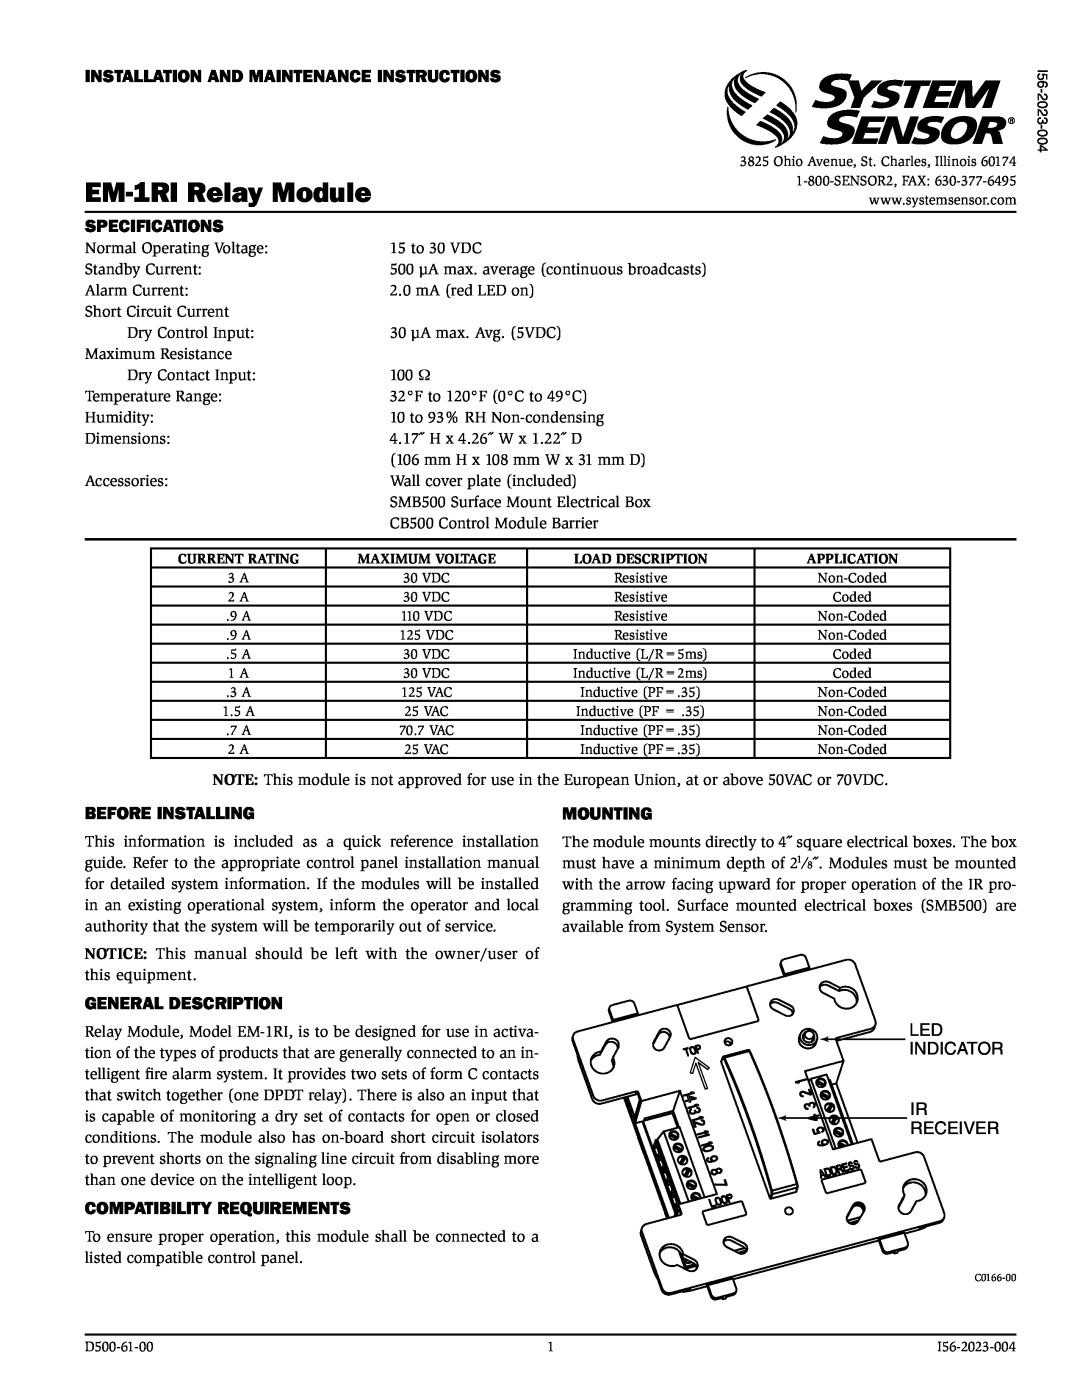 System Sensor EM-1RI specifications Installation And Maintenance Instructions, Specifications, Before Installing, Mounting 